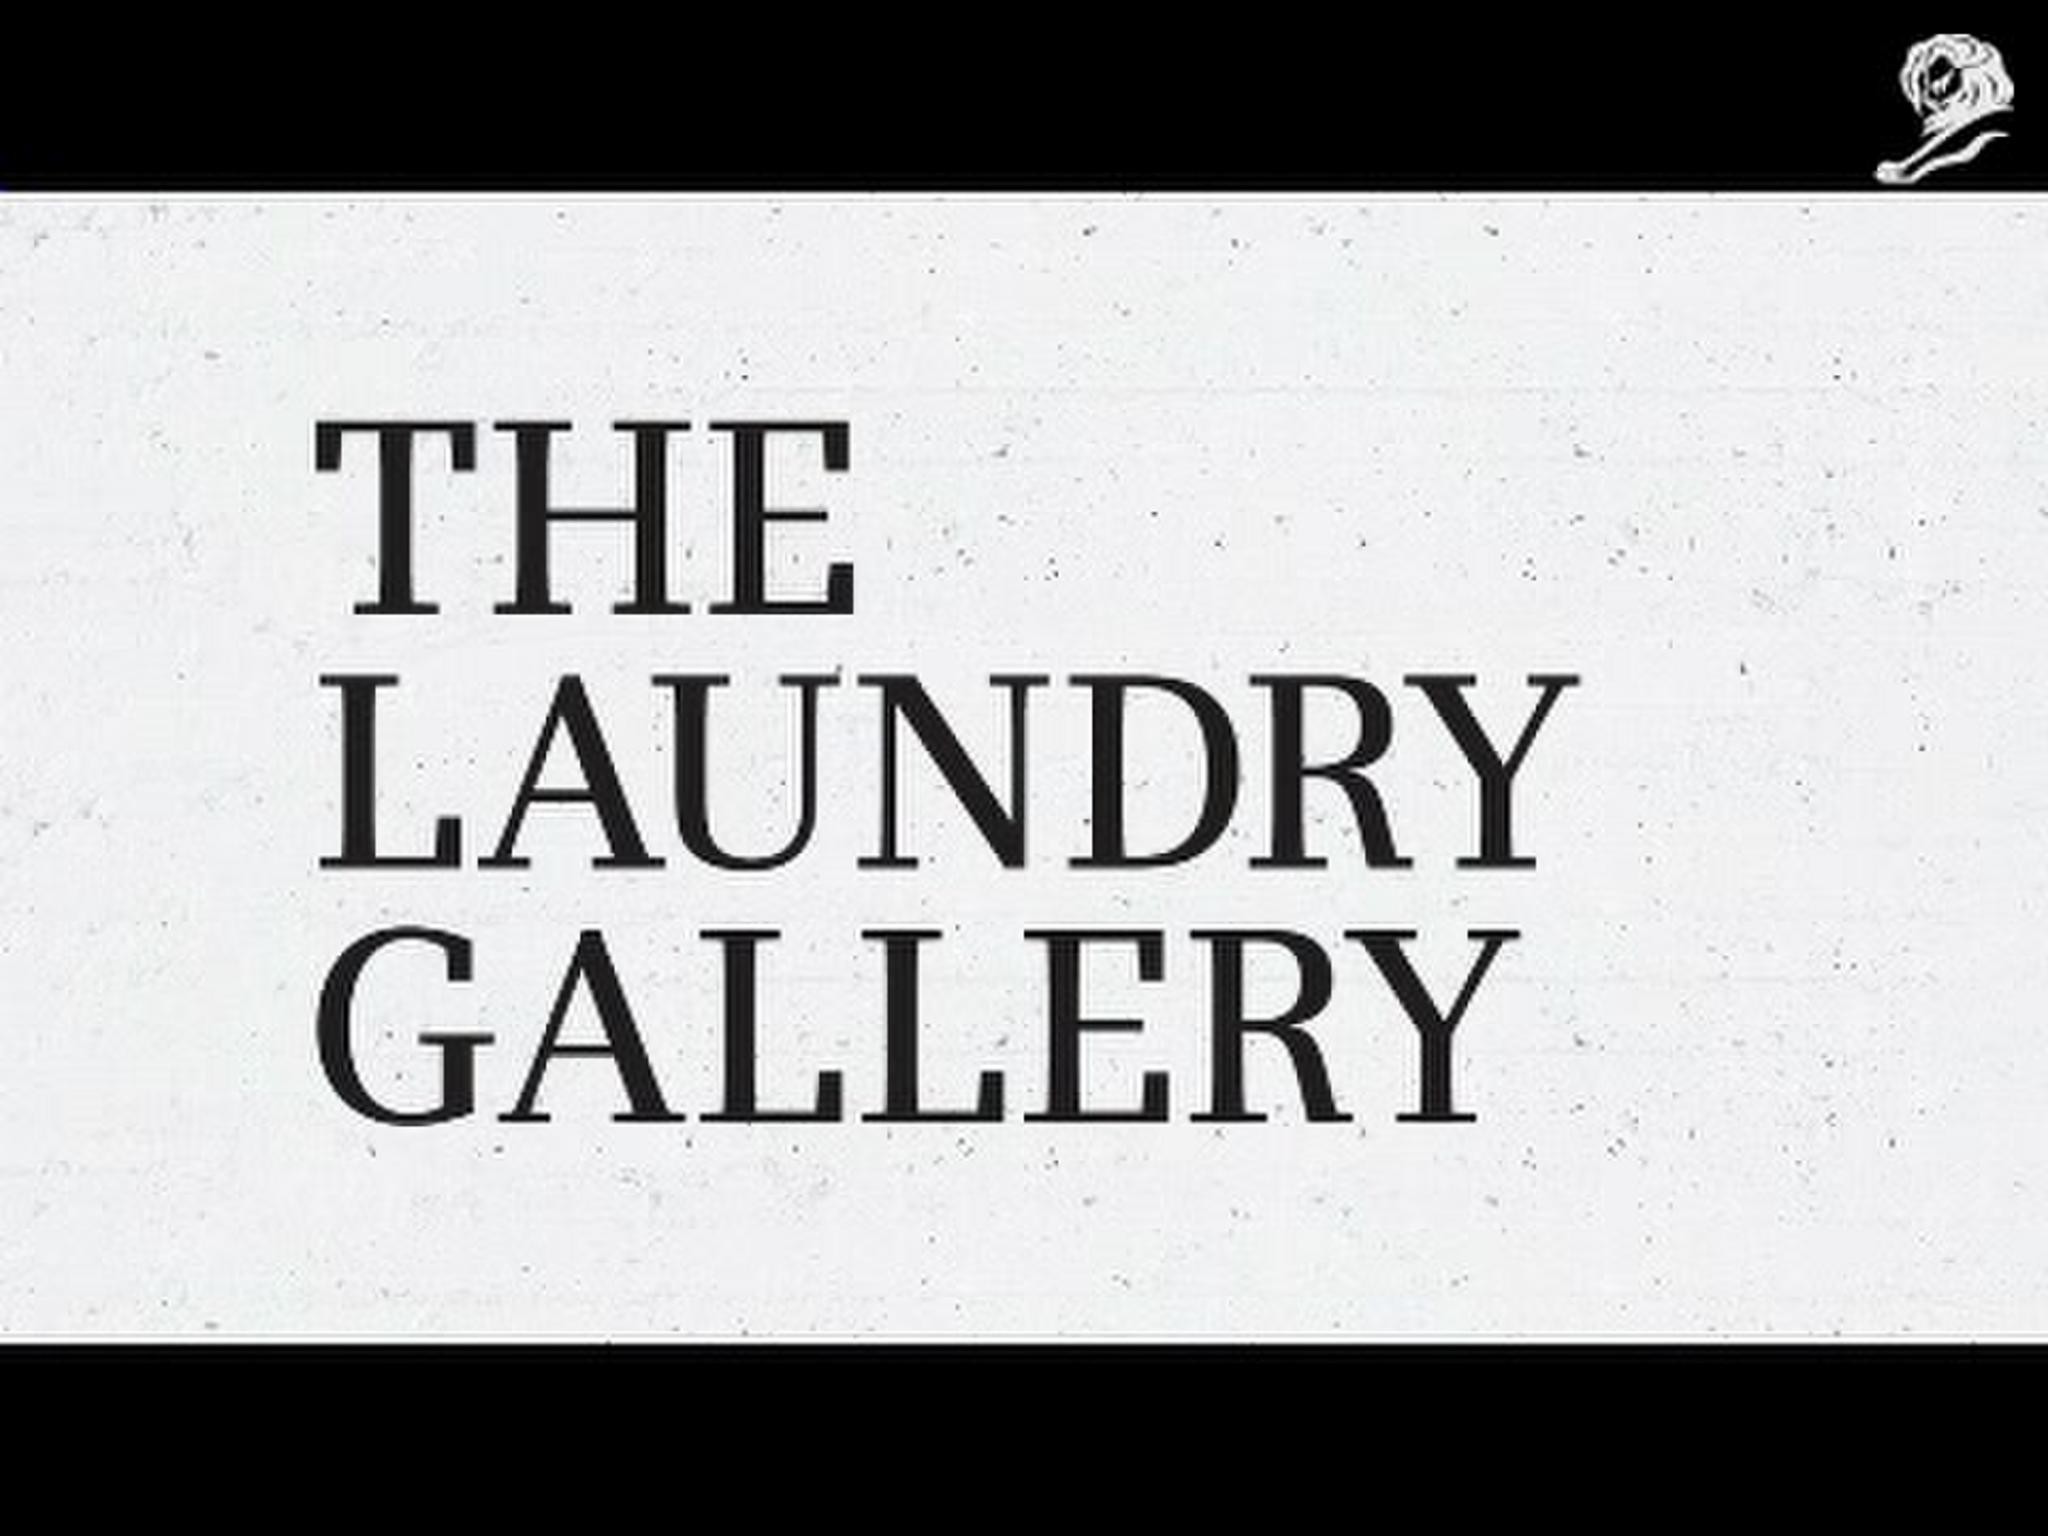 THE LAUNDRY GALLERY